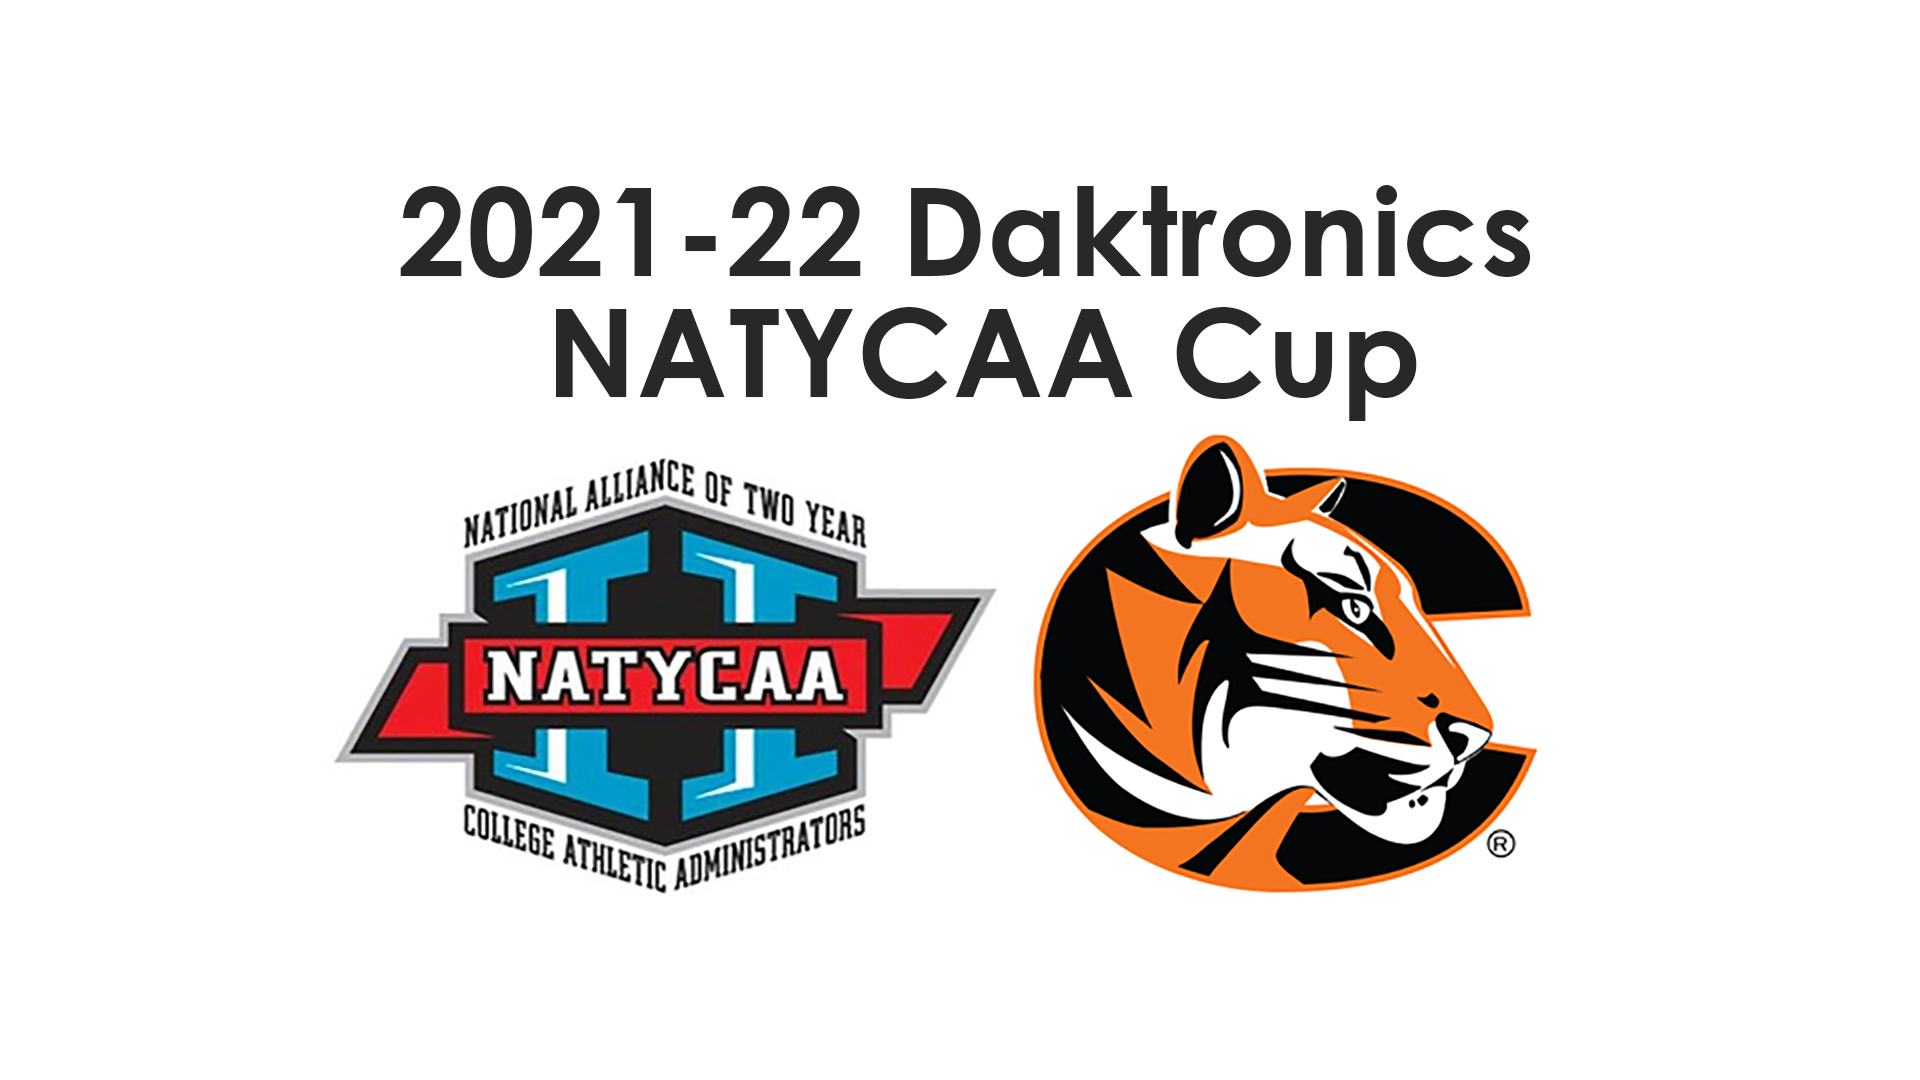 Cowley College places fourth in NATYCAA Cup standings